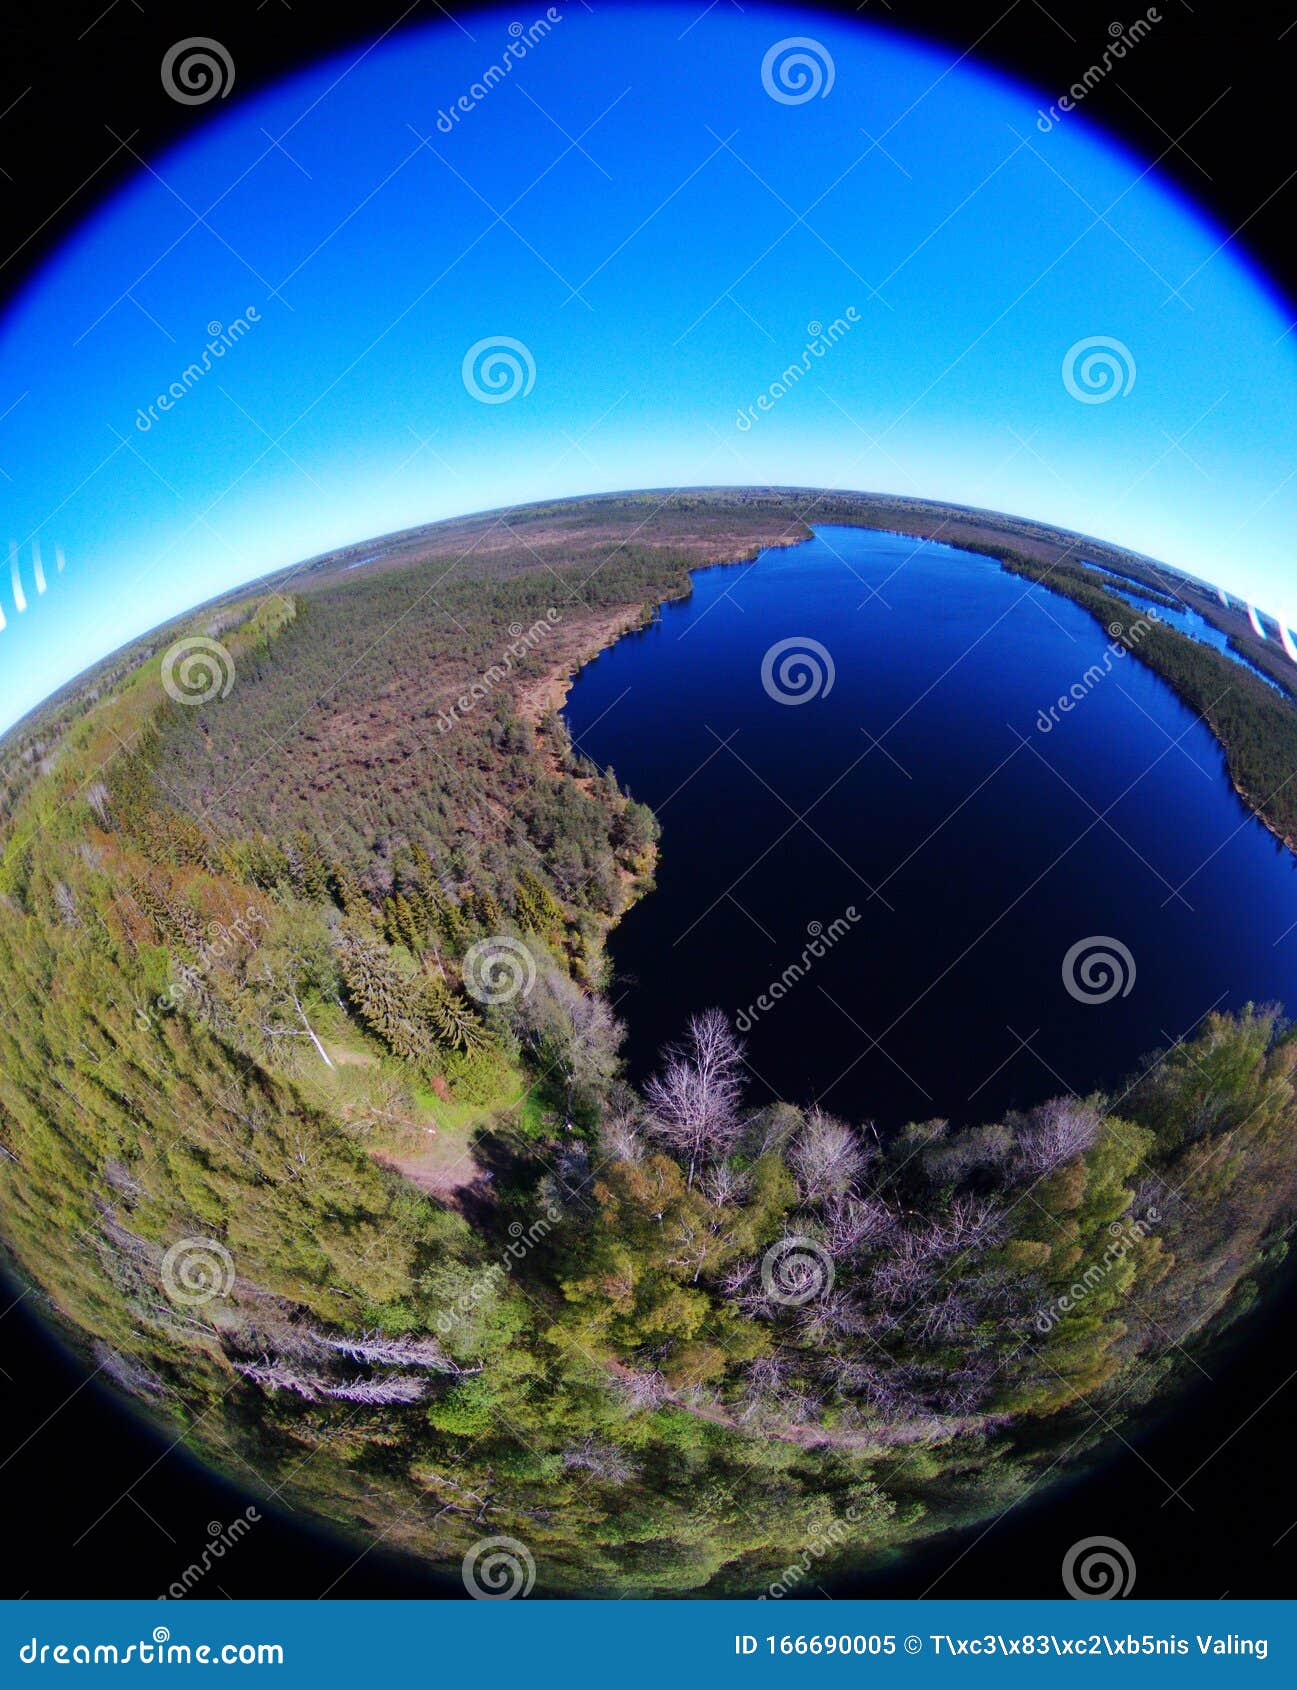 Andrew Halliday udløb Shah Fisheye Drone View Over the Bog Area Stock Image - Image of lake,  perception: 166690005